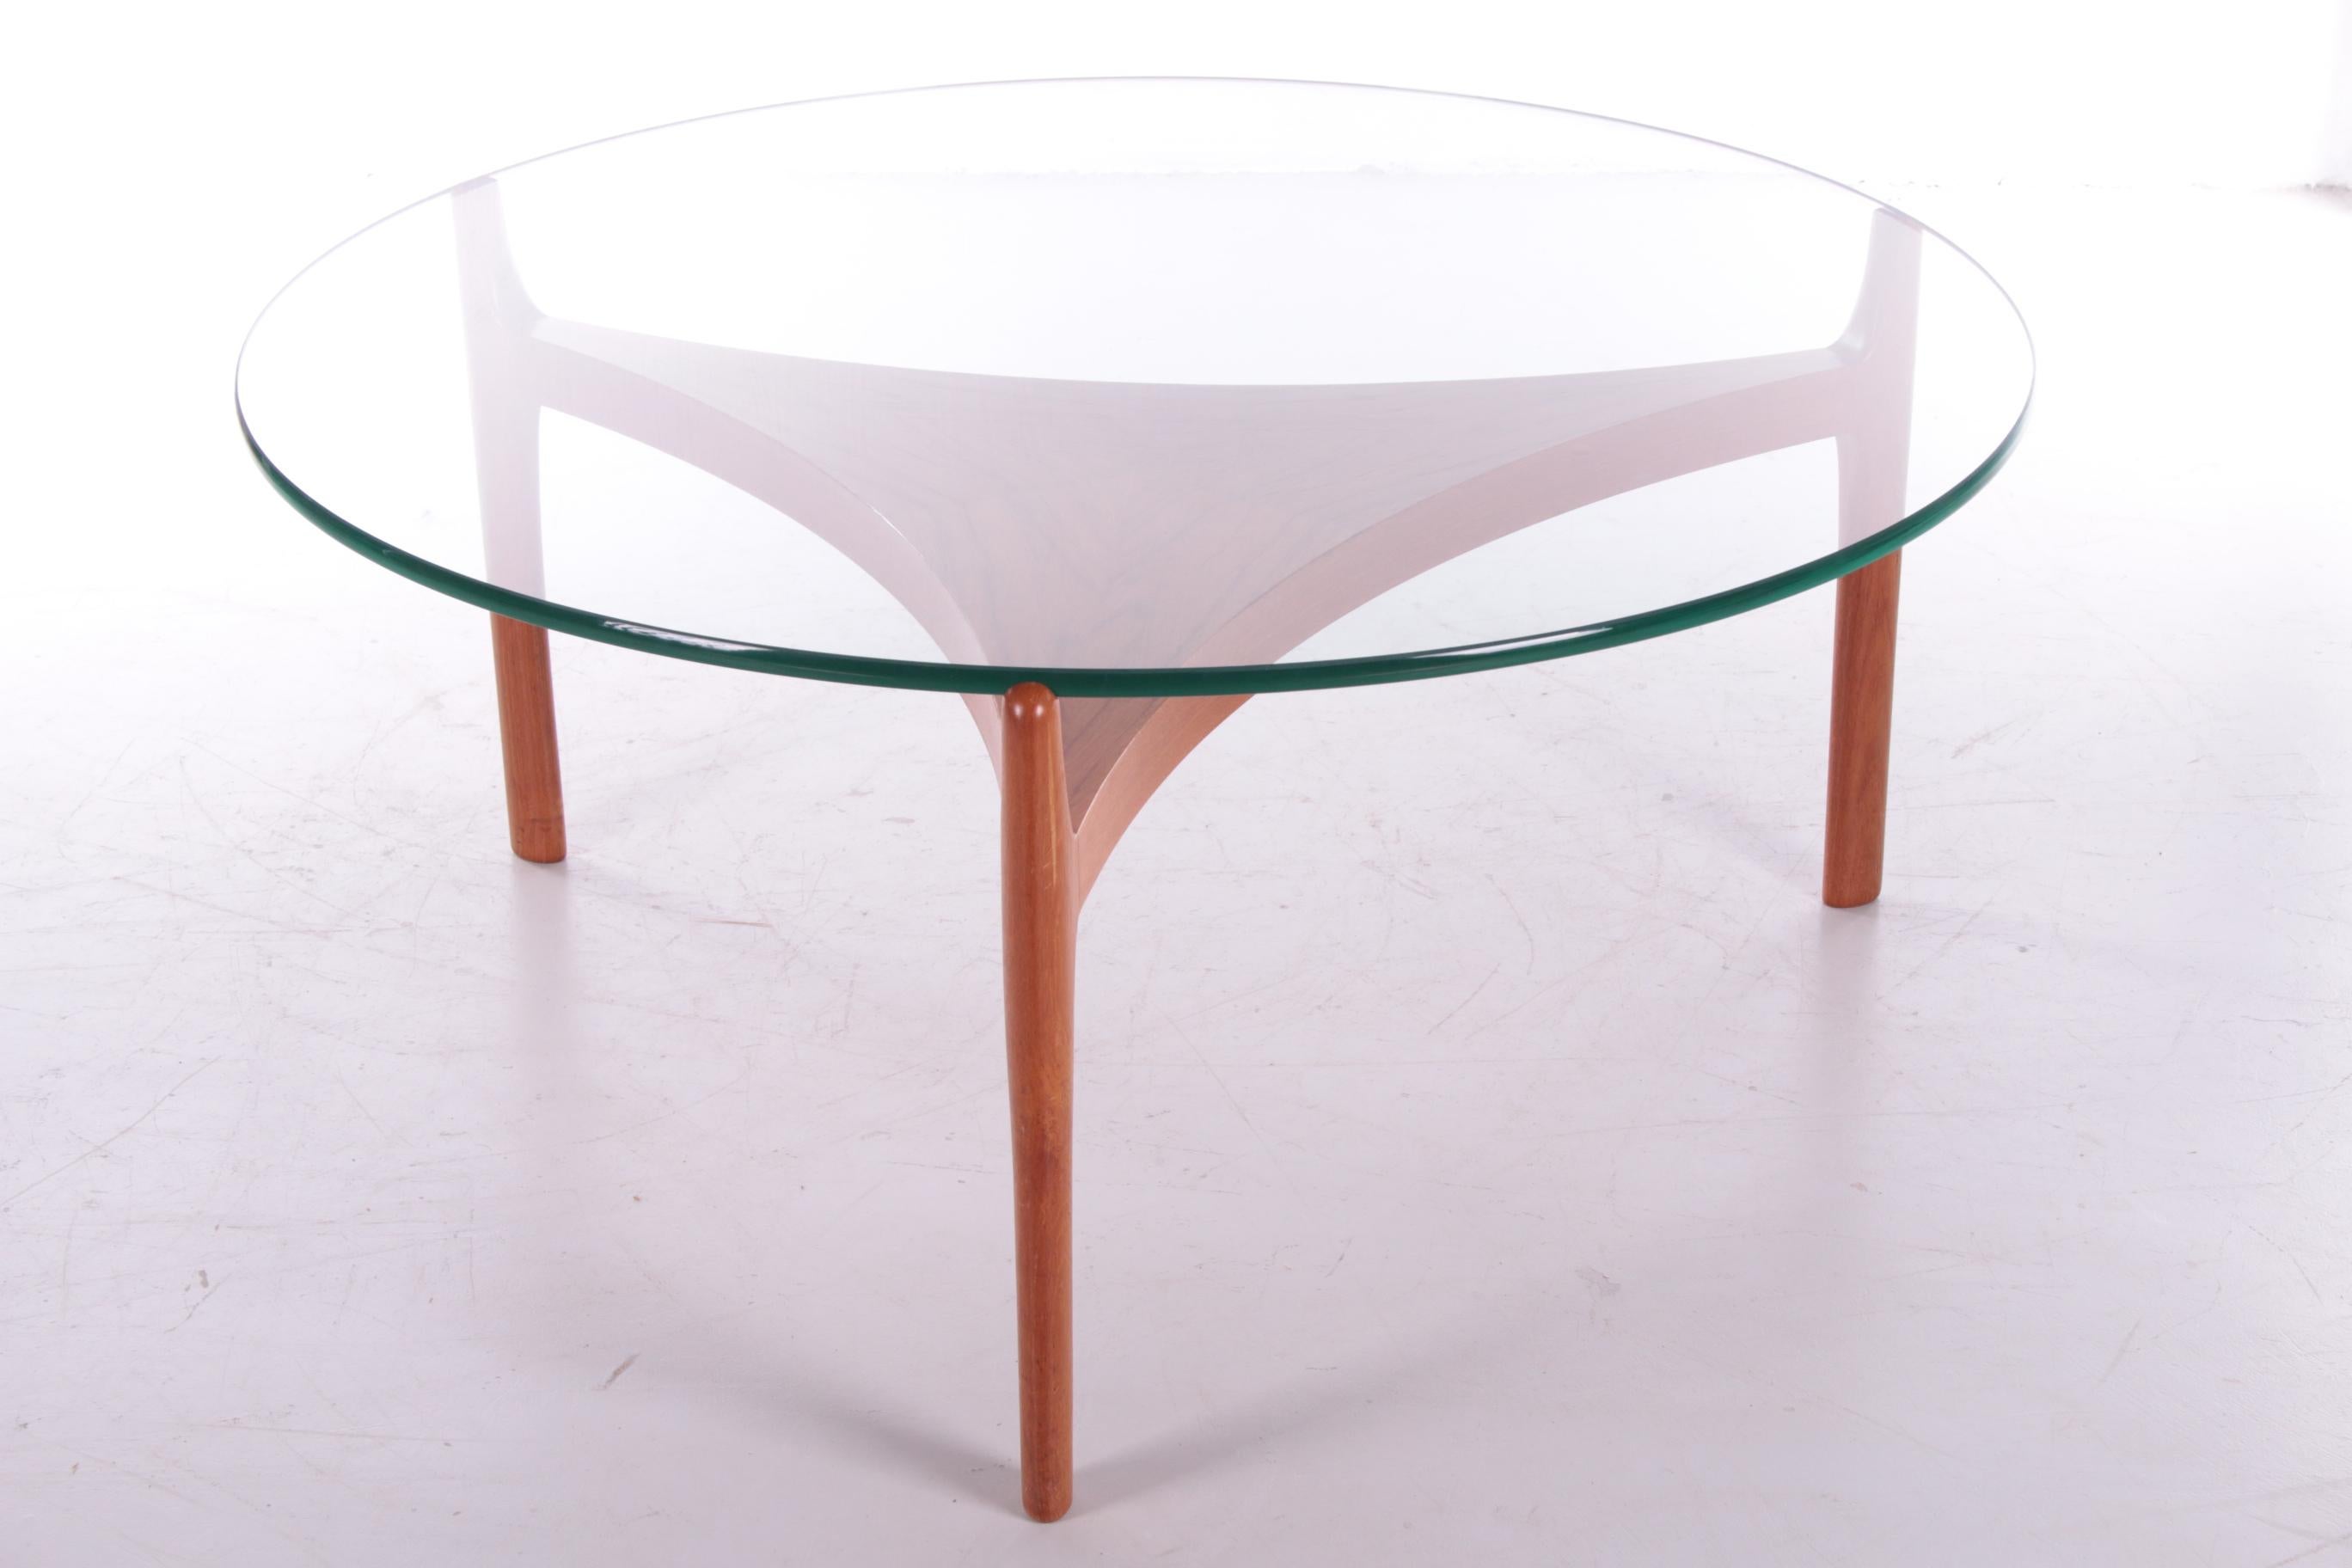 Beautiful teak coffee table designed by Sven Ellekaer 

from Christian Linneberg Mobelfabrik, Denmark in 1960.

The elegant base is made of curved teak with a thick glass top. 

The combination of the two materials gives the table a simple and